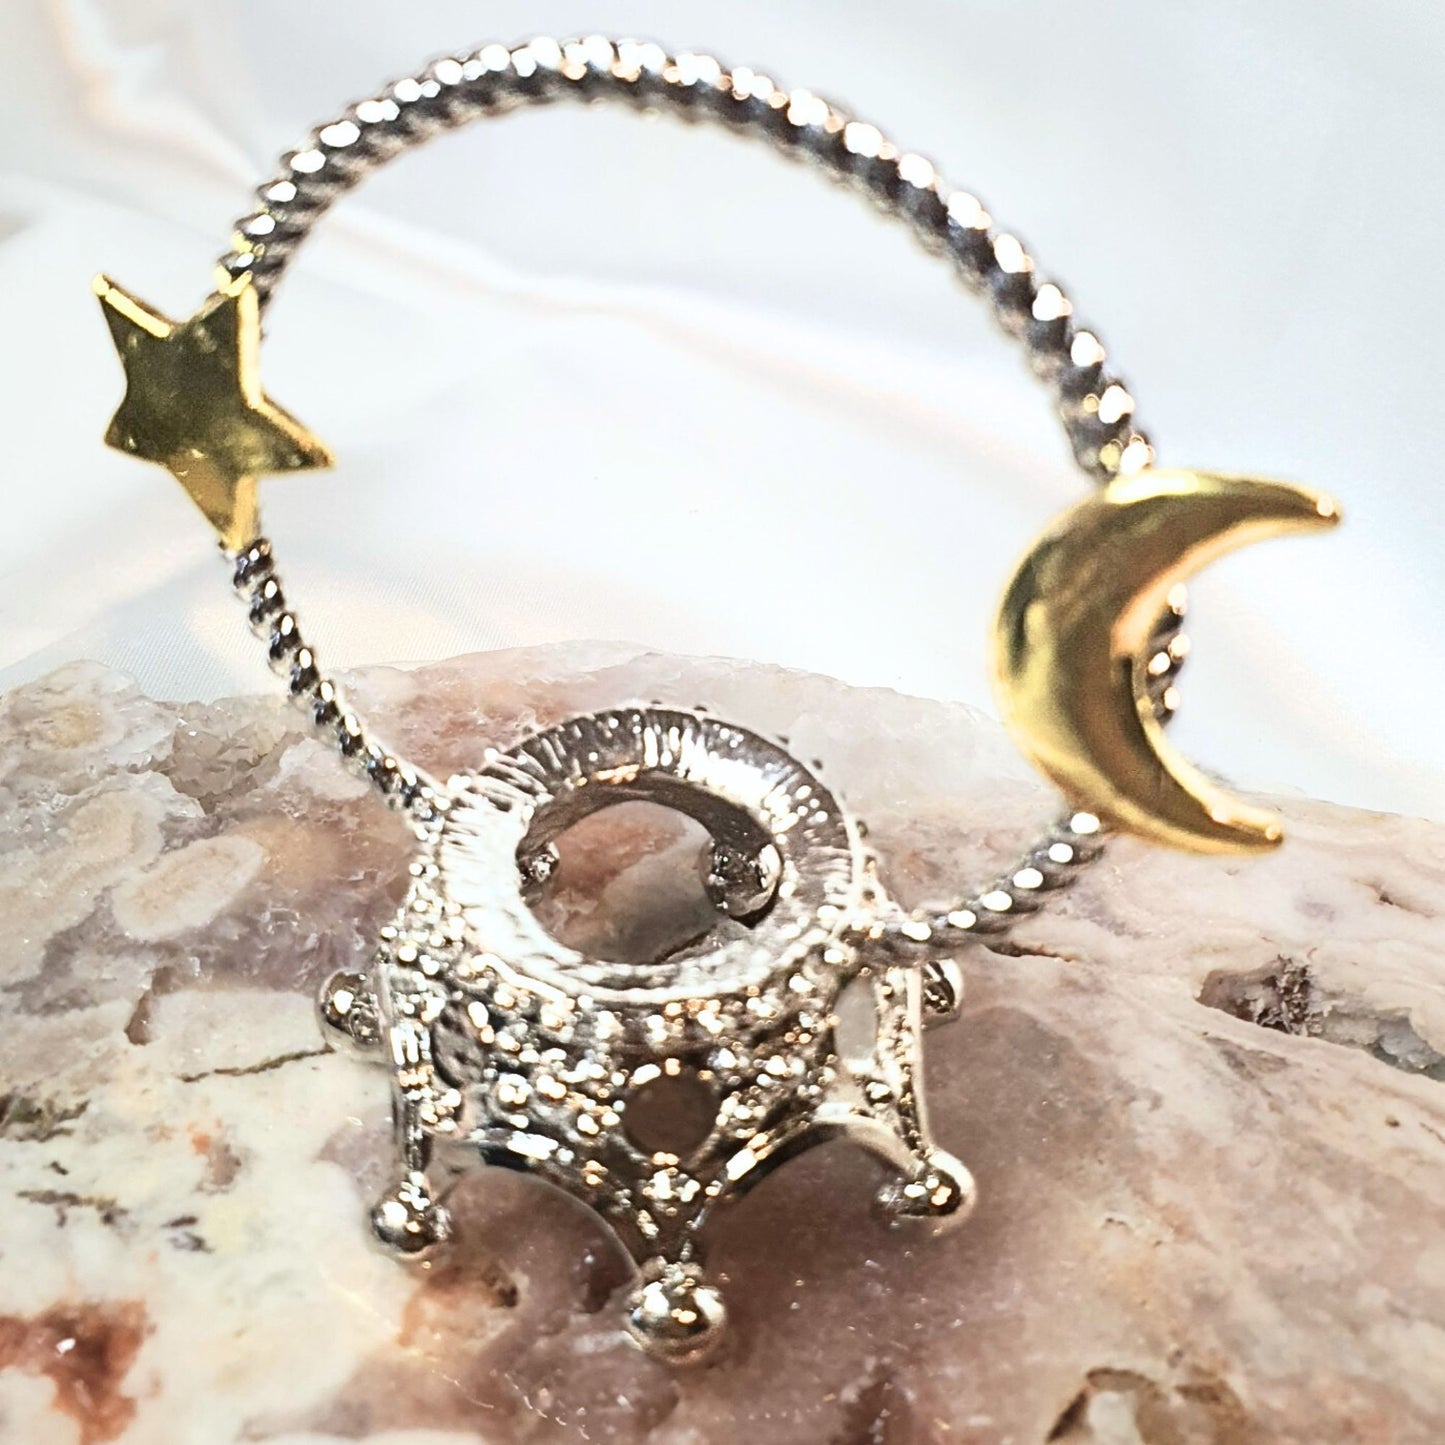 Star and Moon Sphere Silver Metal Stand Holder